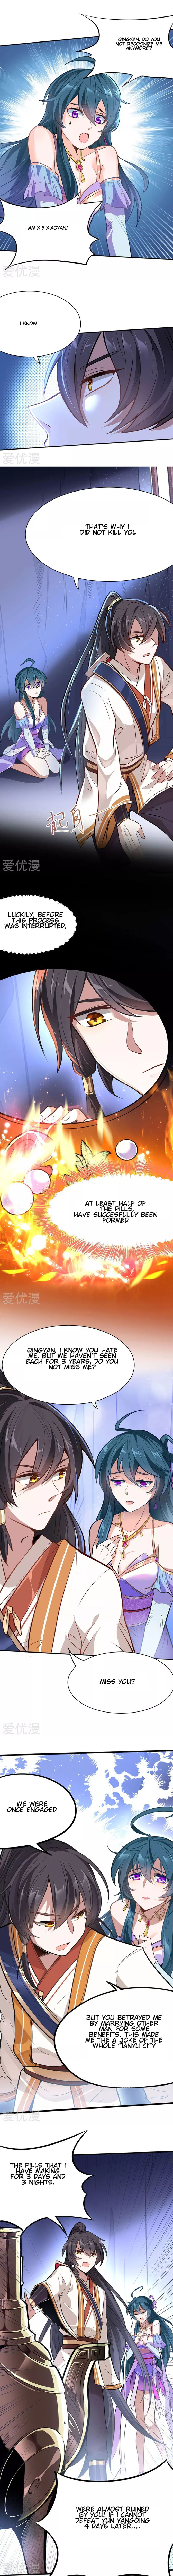 Return of Immortal Emperor Ch. 8 Chapter 8